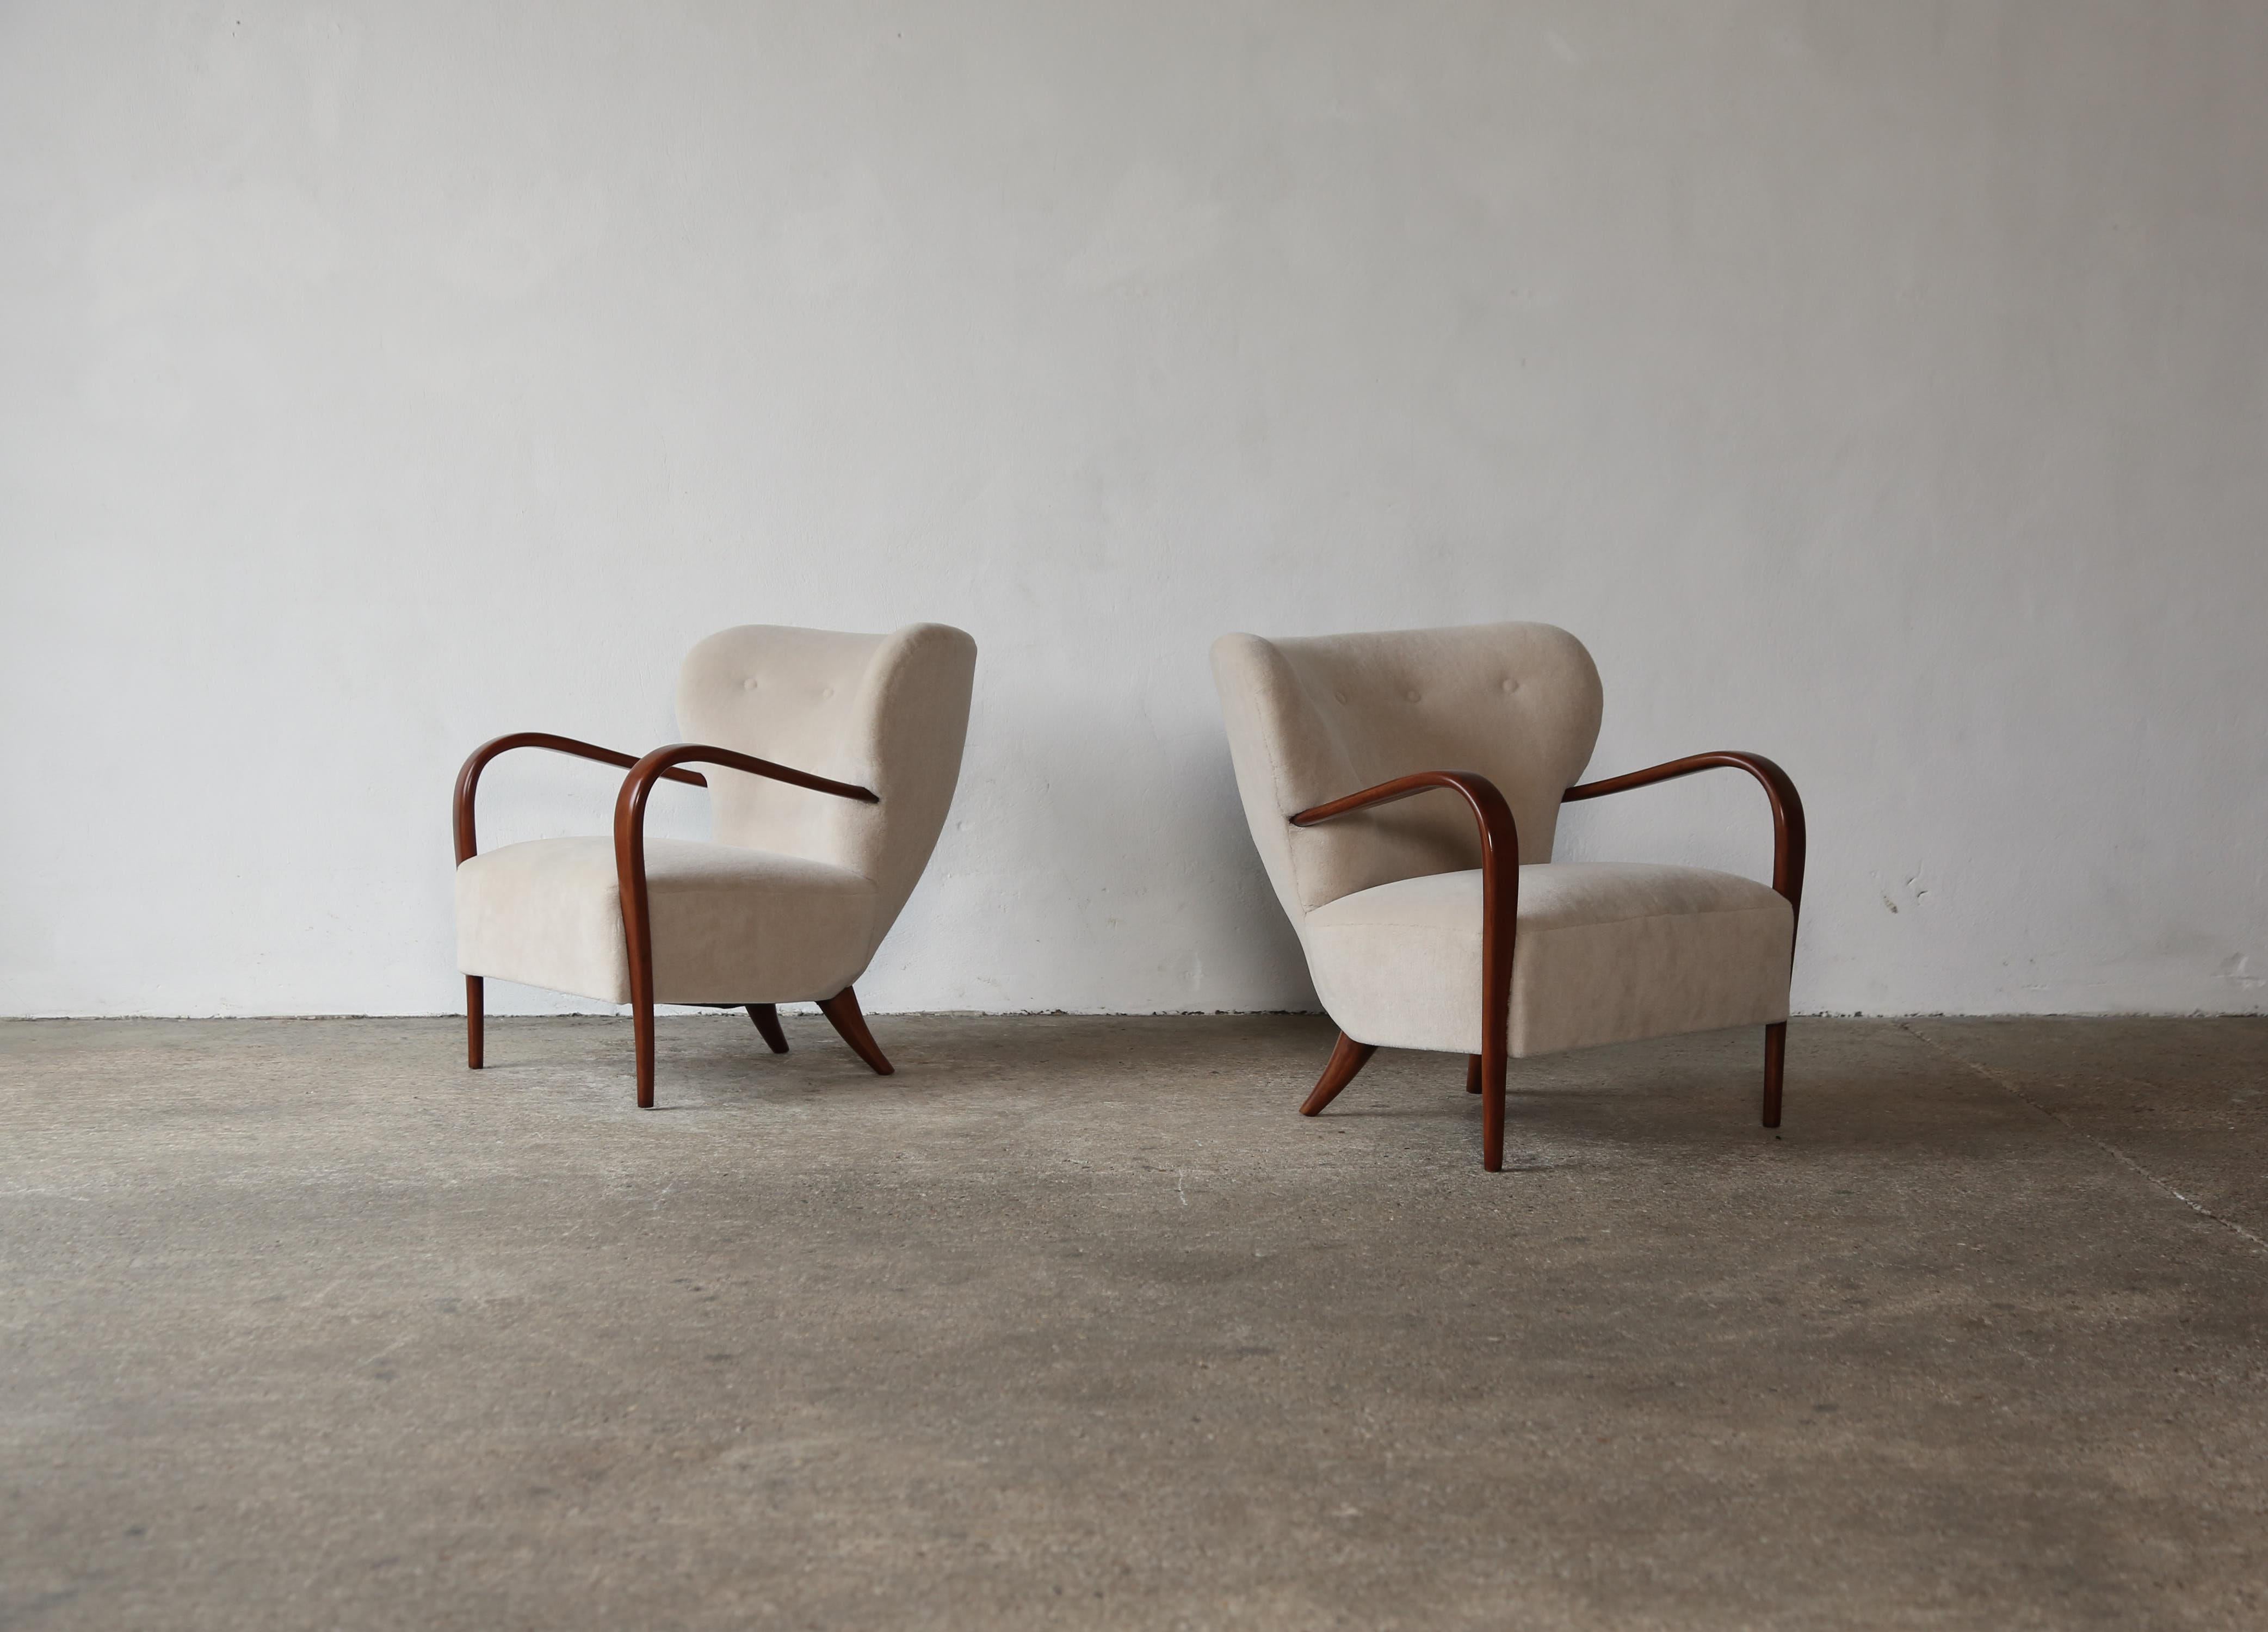 A rare and important pair of 1940s armchairs designed by Silvio Cavatorta. Made by hand in the Cavatorta workplace in Rome.   In very good restored condition these chairs are newly upholstered in a bespoke, premium, soft, pure alpaca wool fabric. 